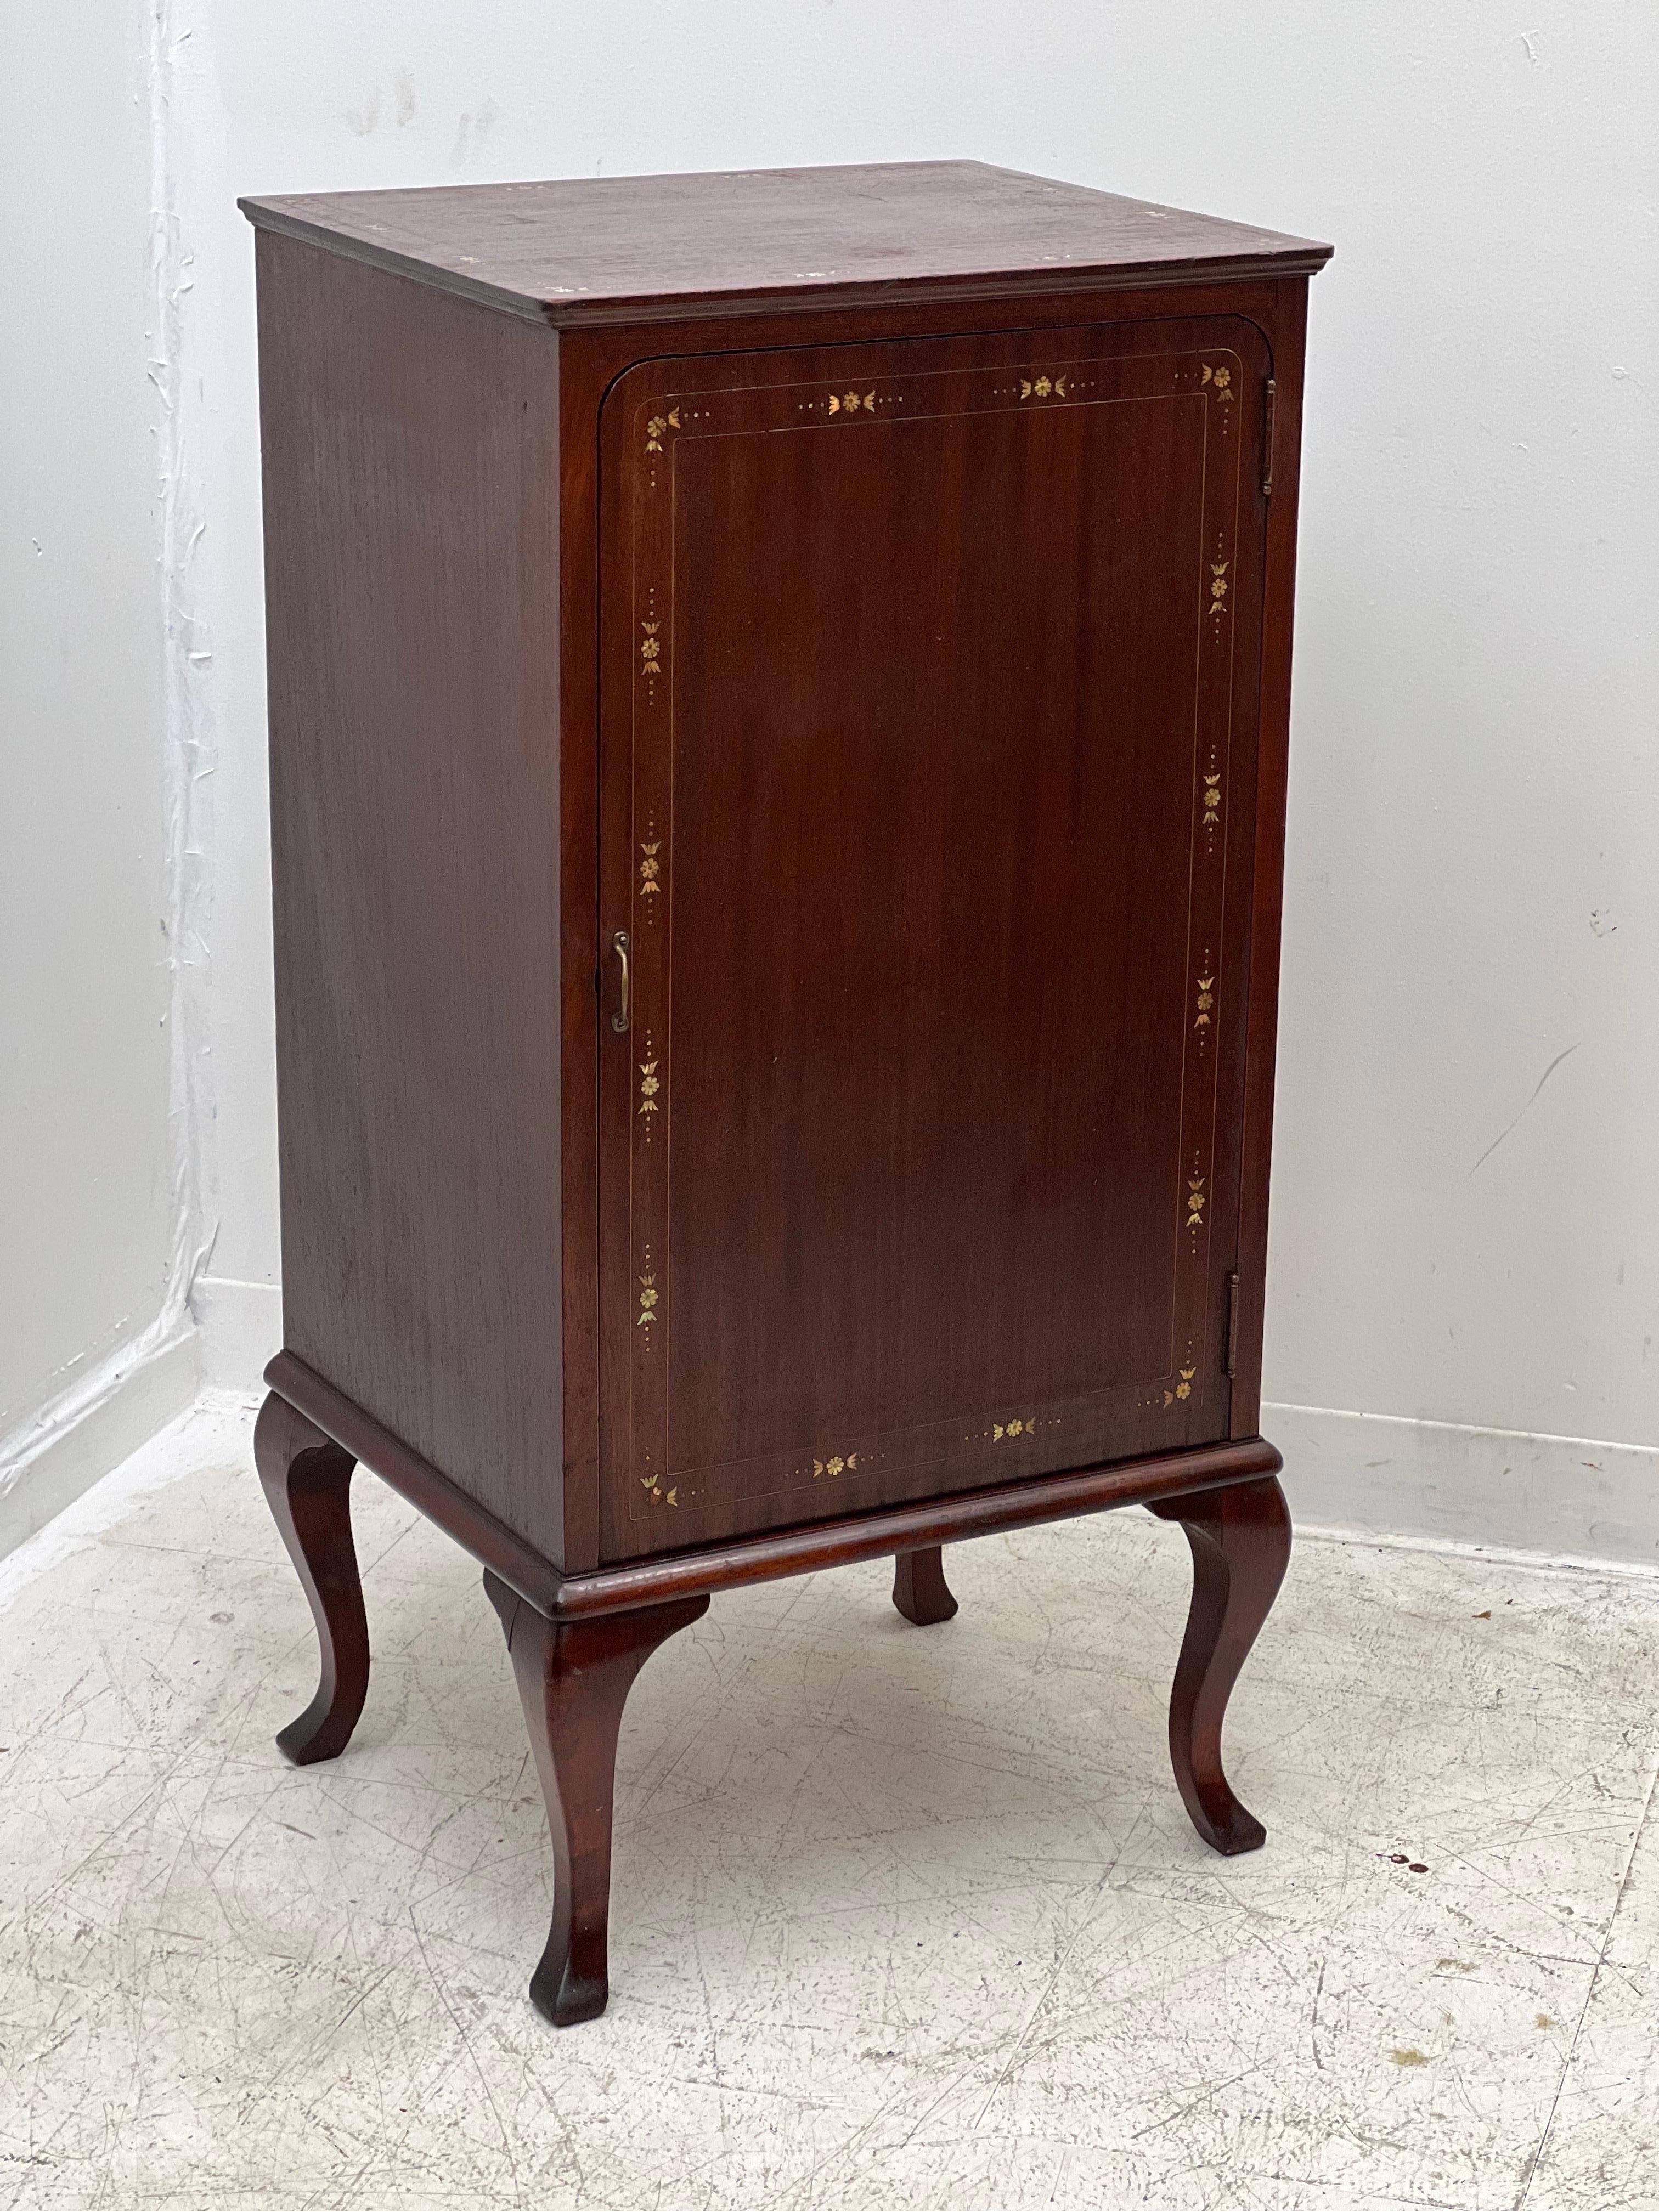 Vintage music cabinet with decorative inlay.

Dimensions. 20 W; 17 D; 40 H.